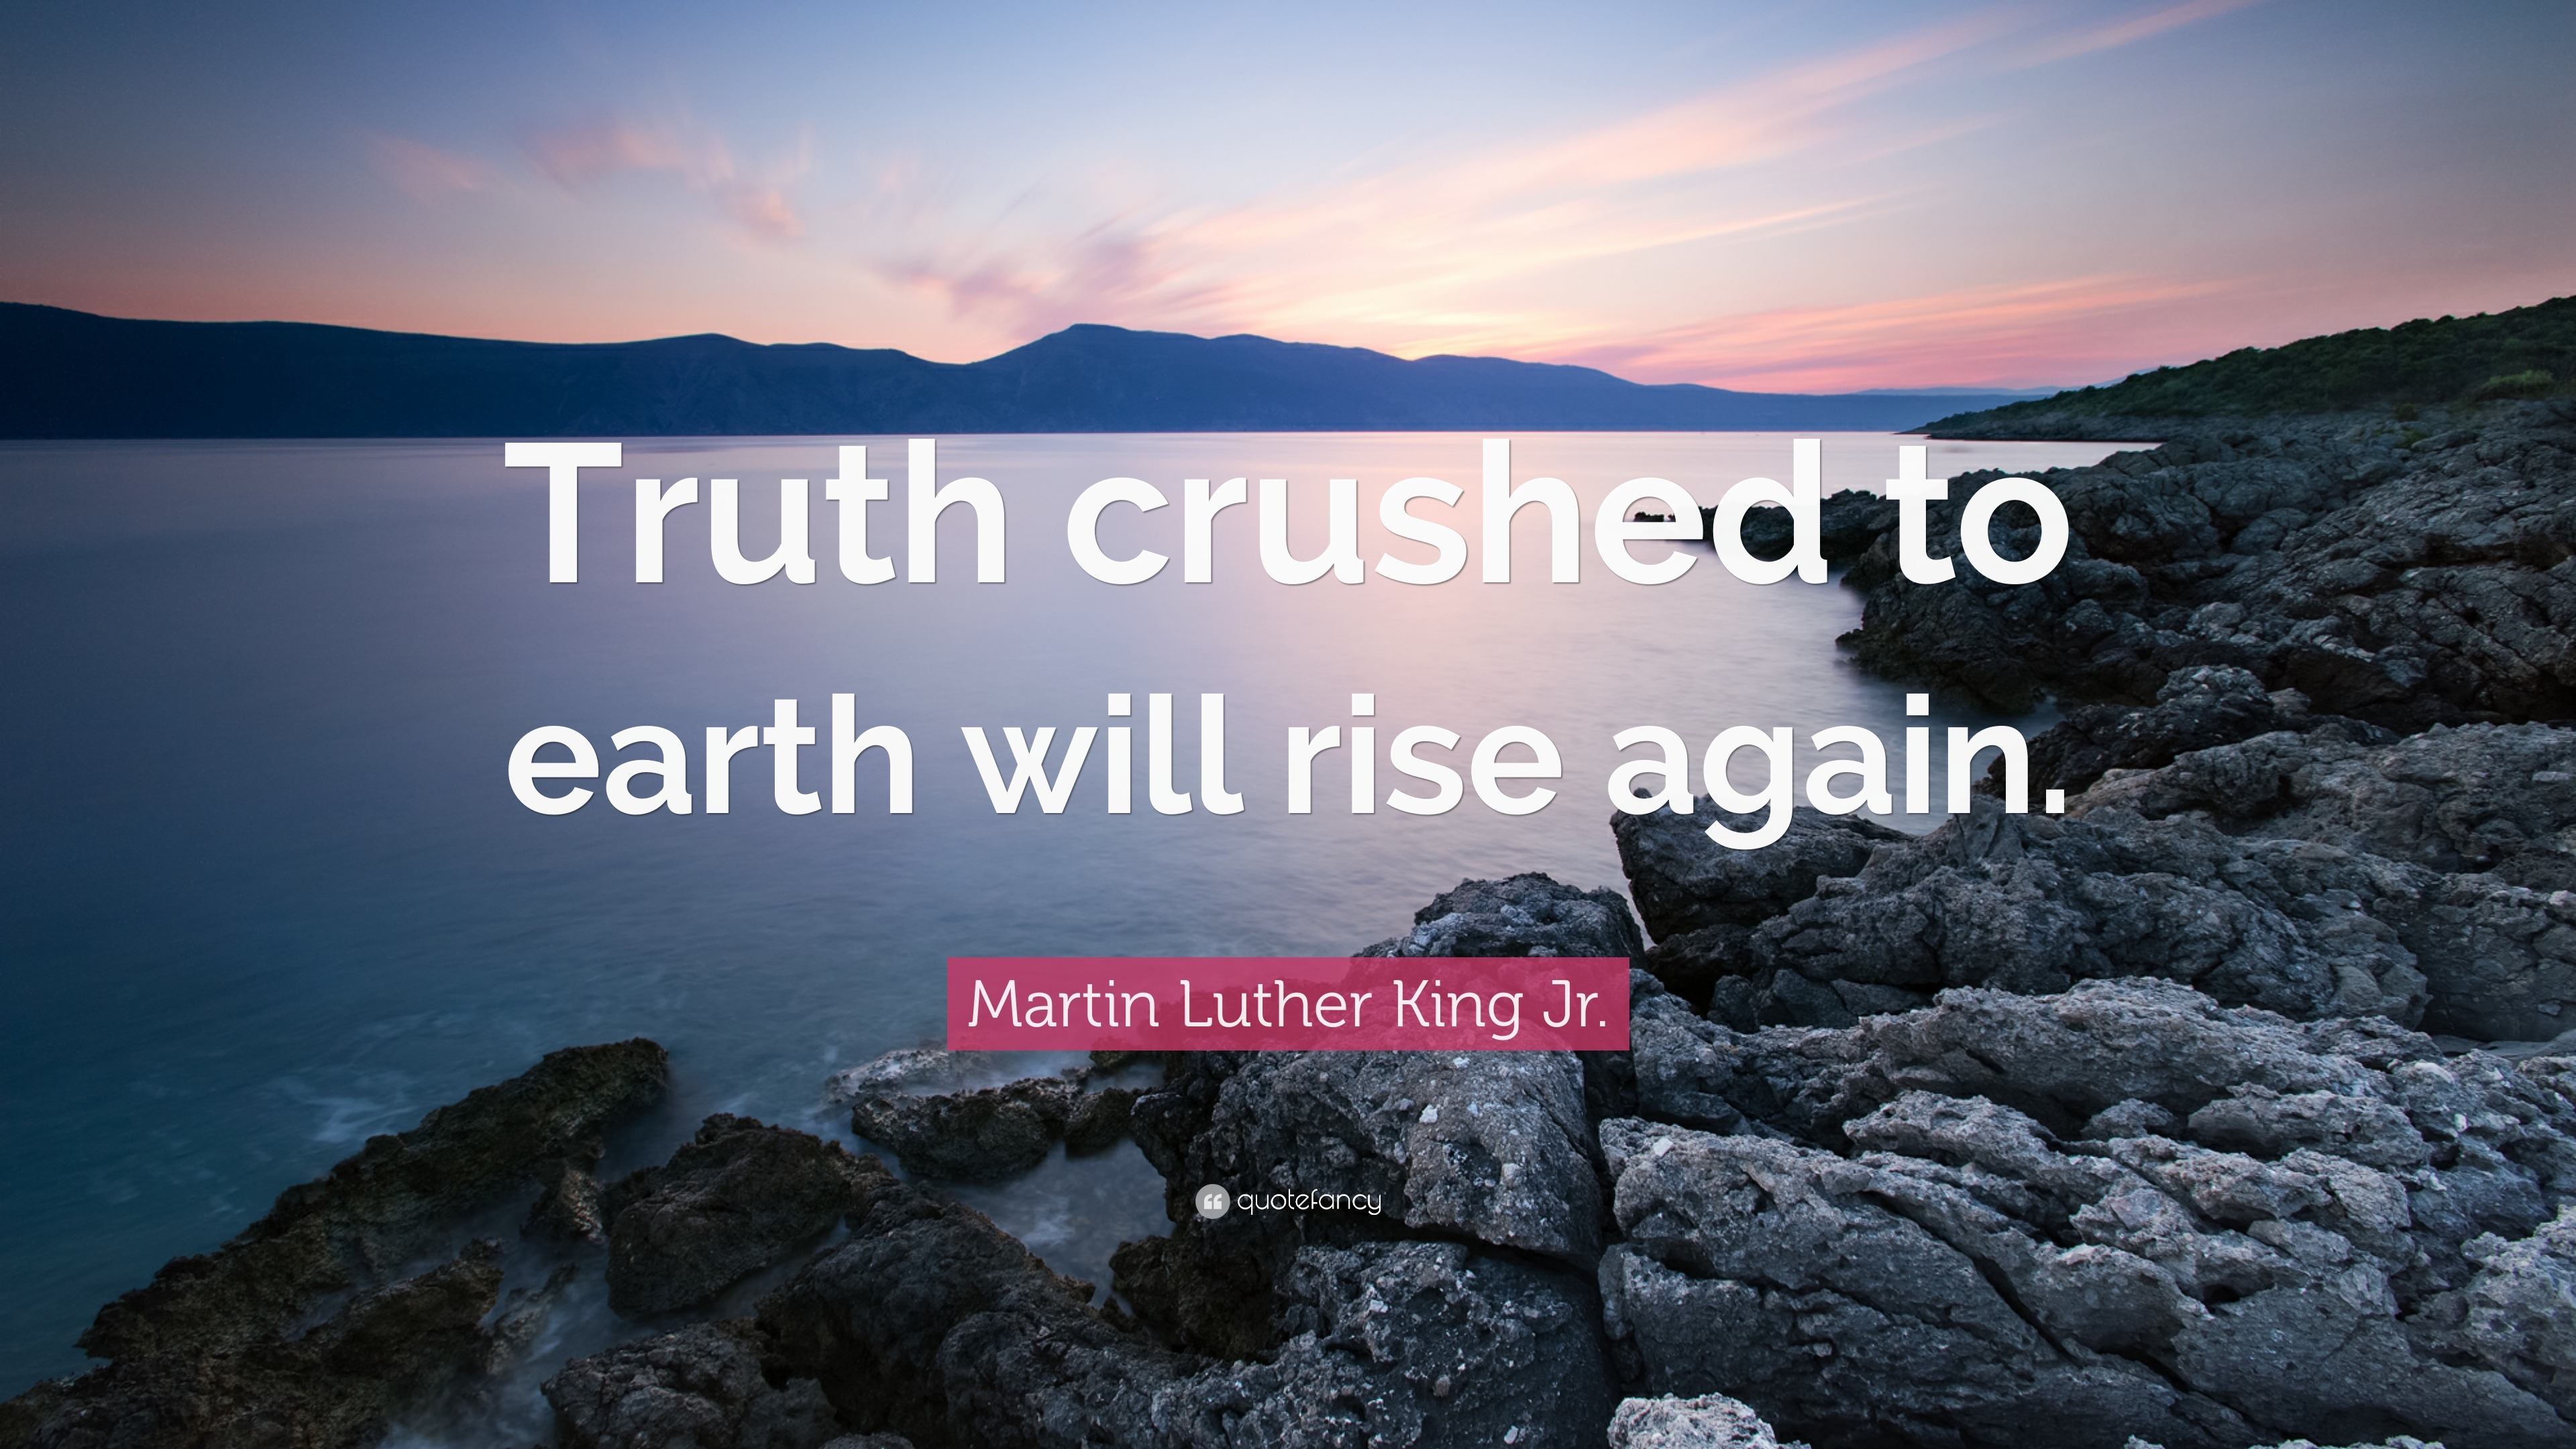 Martin Luther King Jr. Quote: "Truth crushed to earth will ...